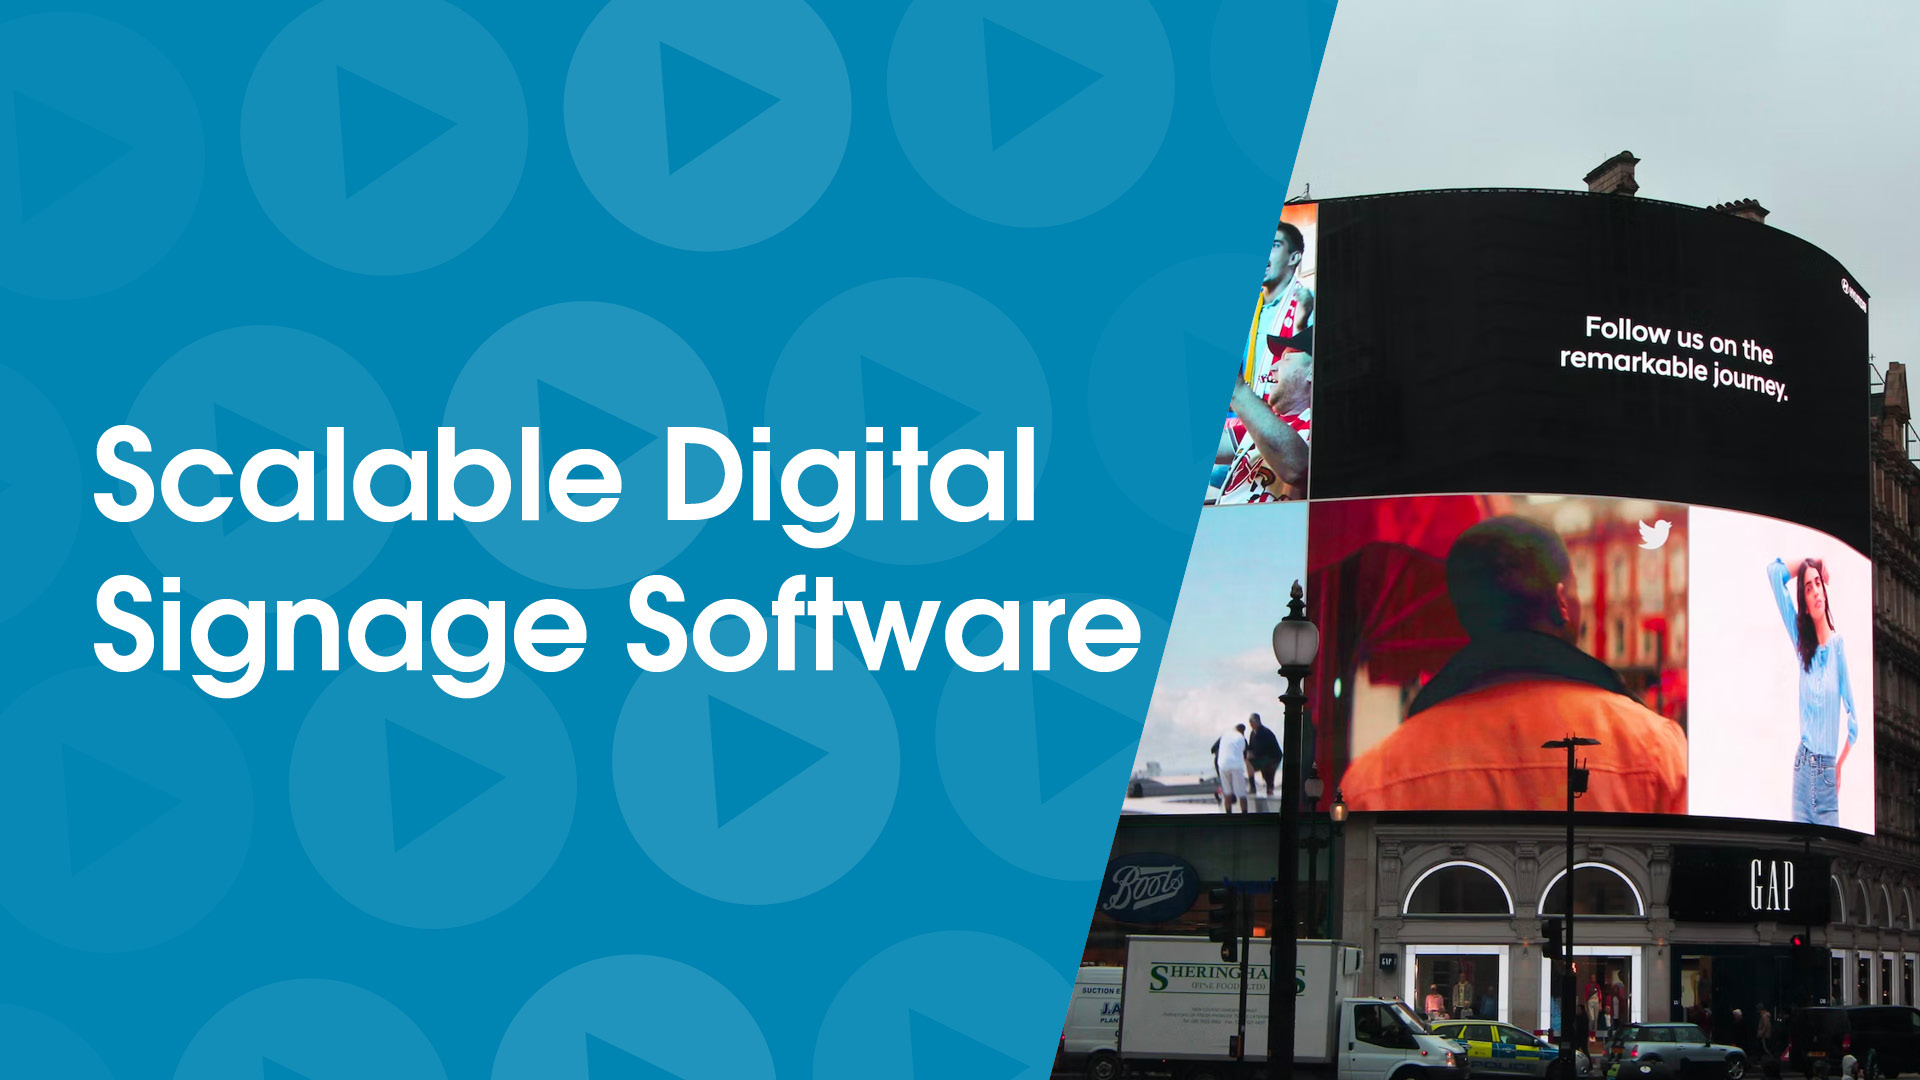 Using a Scalable Digital Signage Software Company